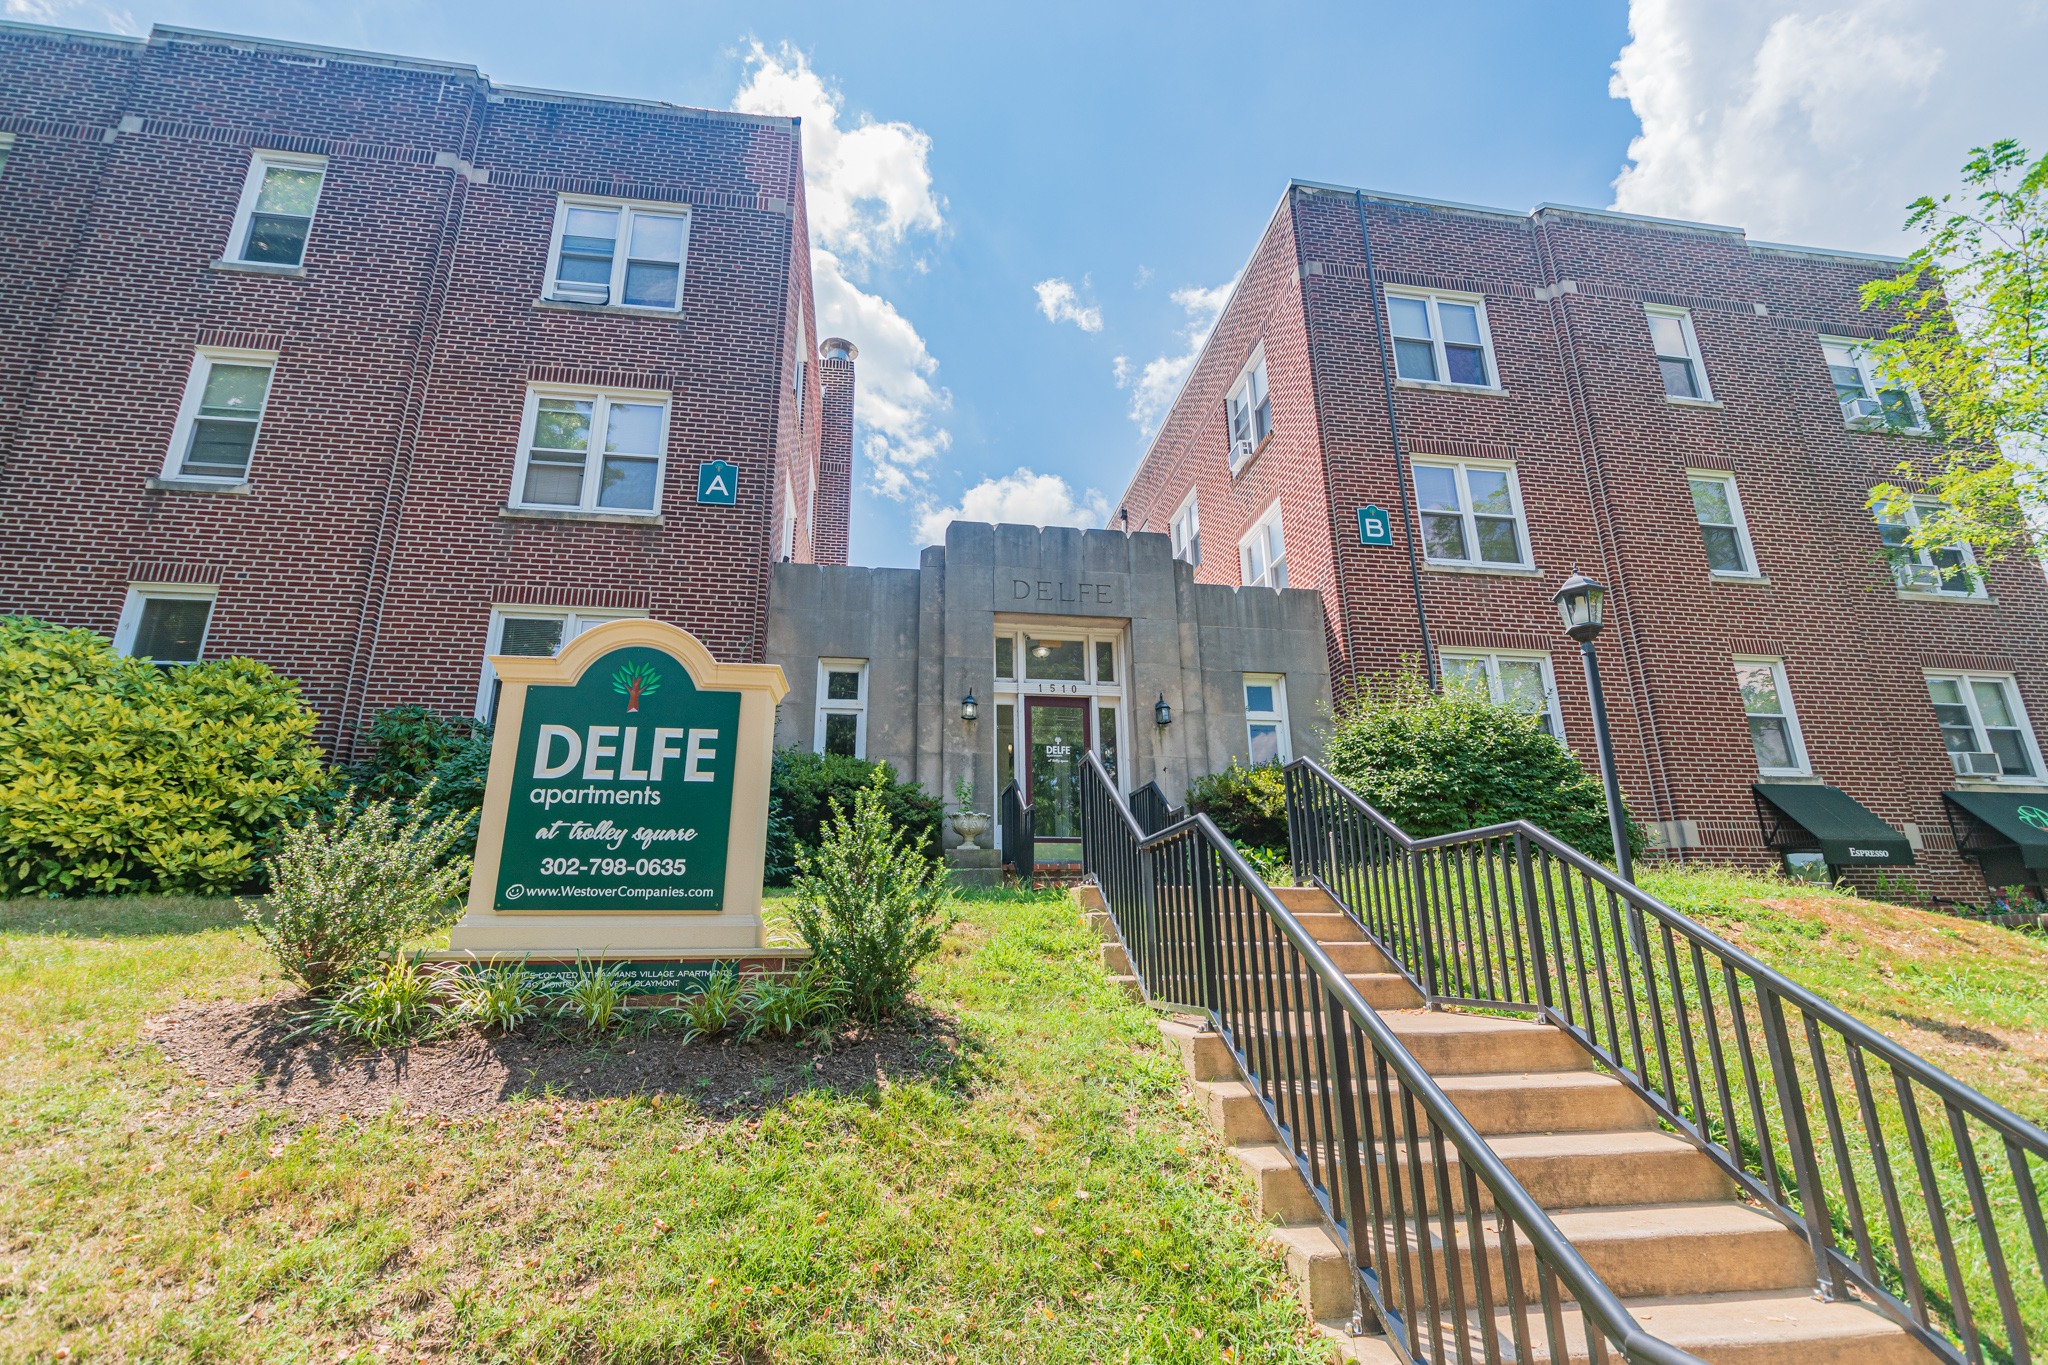 Entrance to the leasing office at Delfe apartments, fitted with steps with railing, and a welcome sign